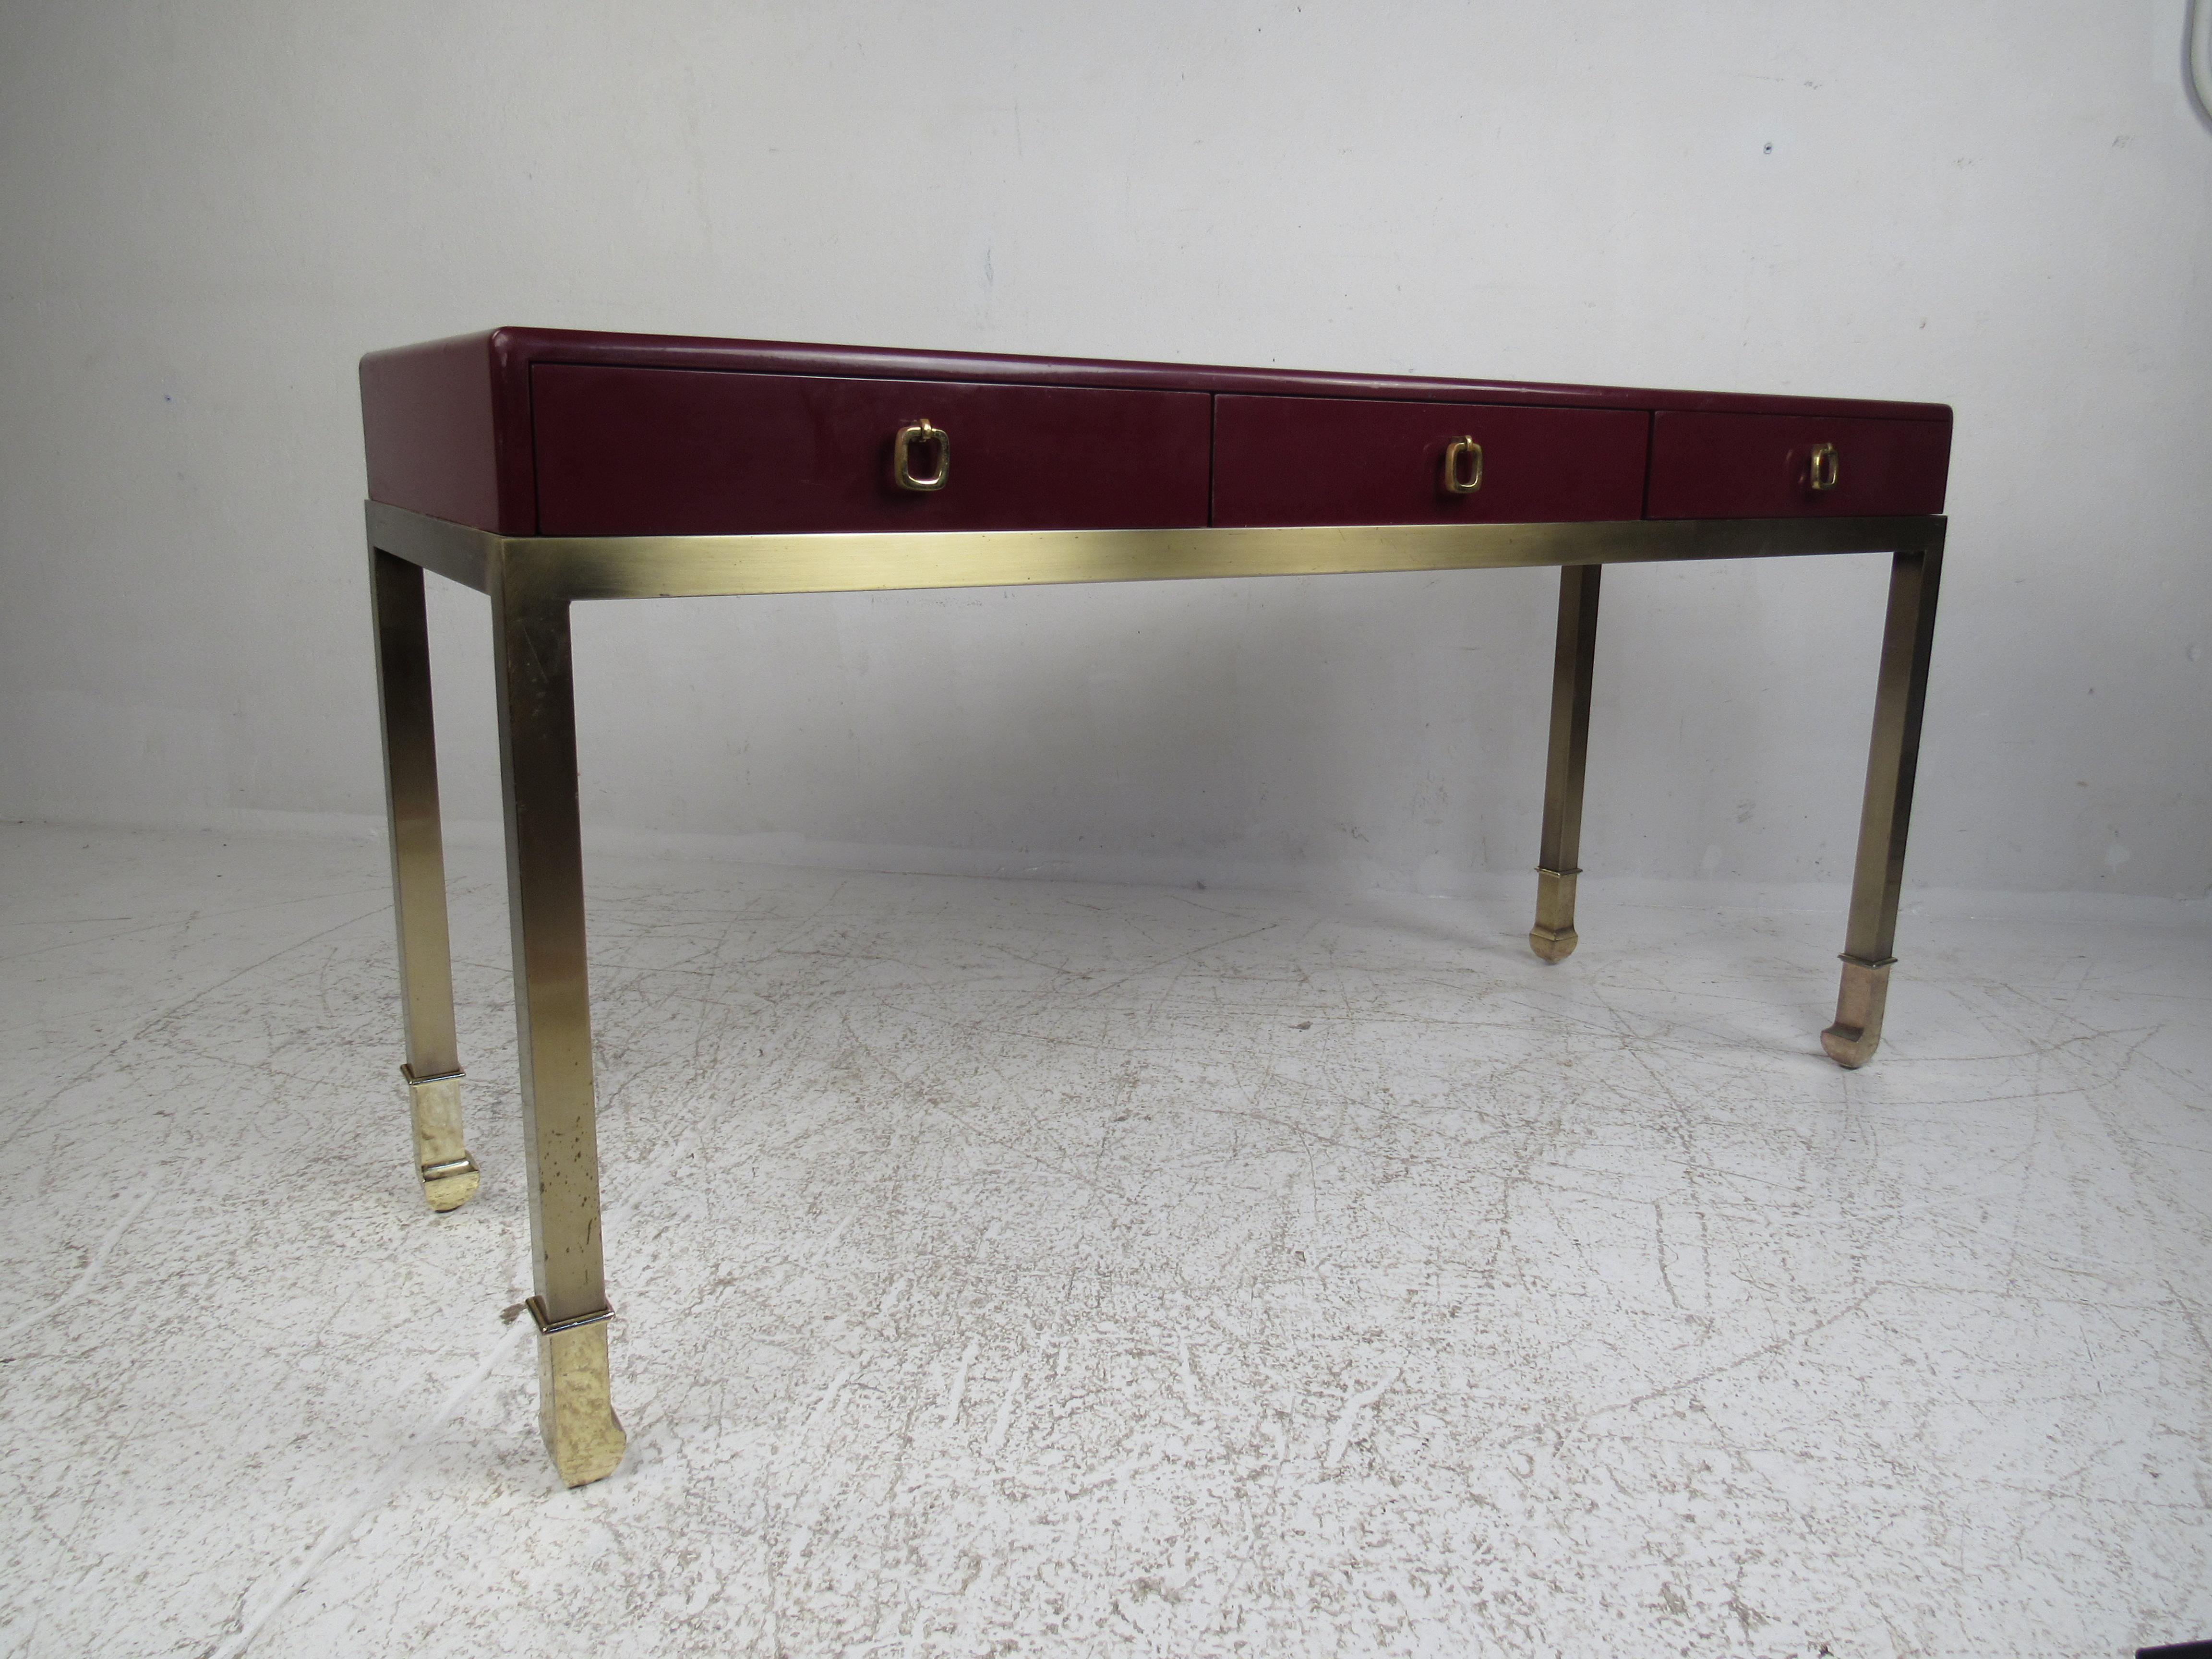 An elegant vintage modern maroon colored console table with unique brass drawer pulls and sculpted feet. The three hefty drawers ensure plenty of room for storage. This versatile Mid-Century Modern piece functions as a desk, vanity, or hall table. A